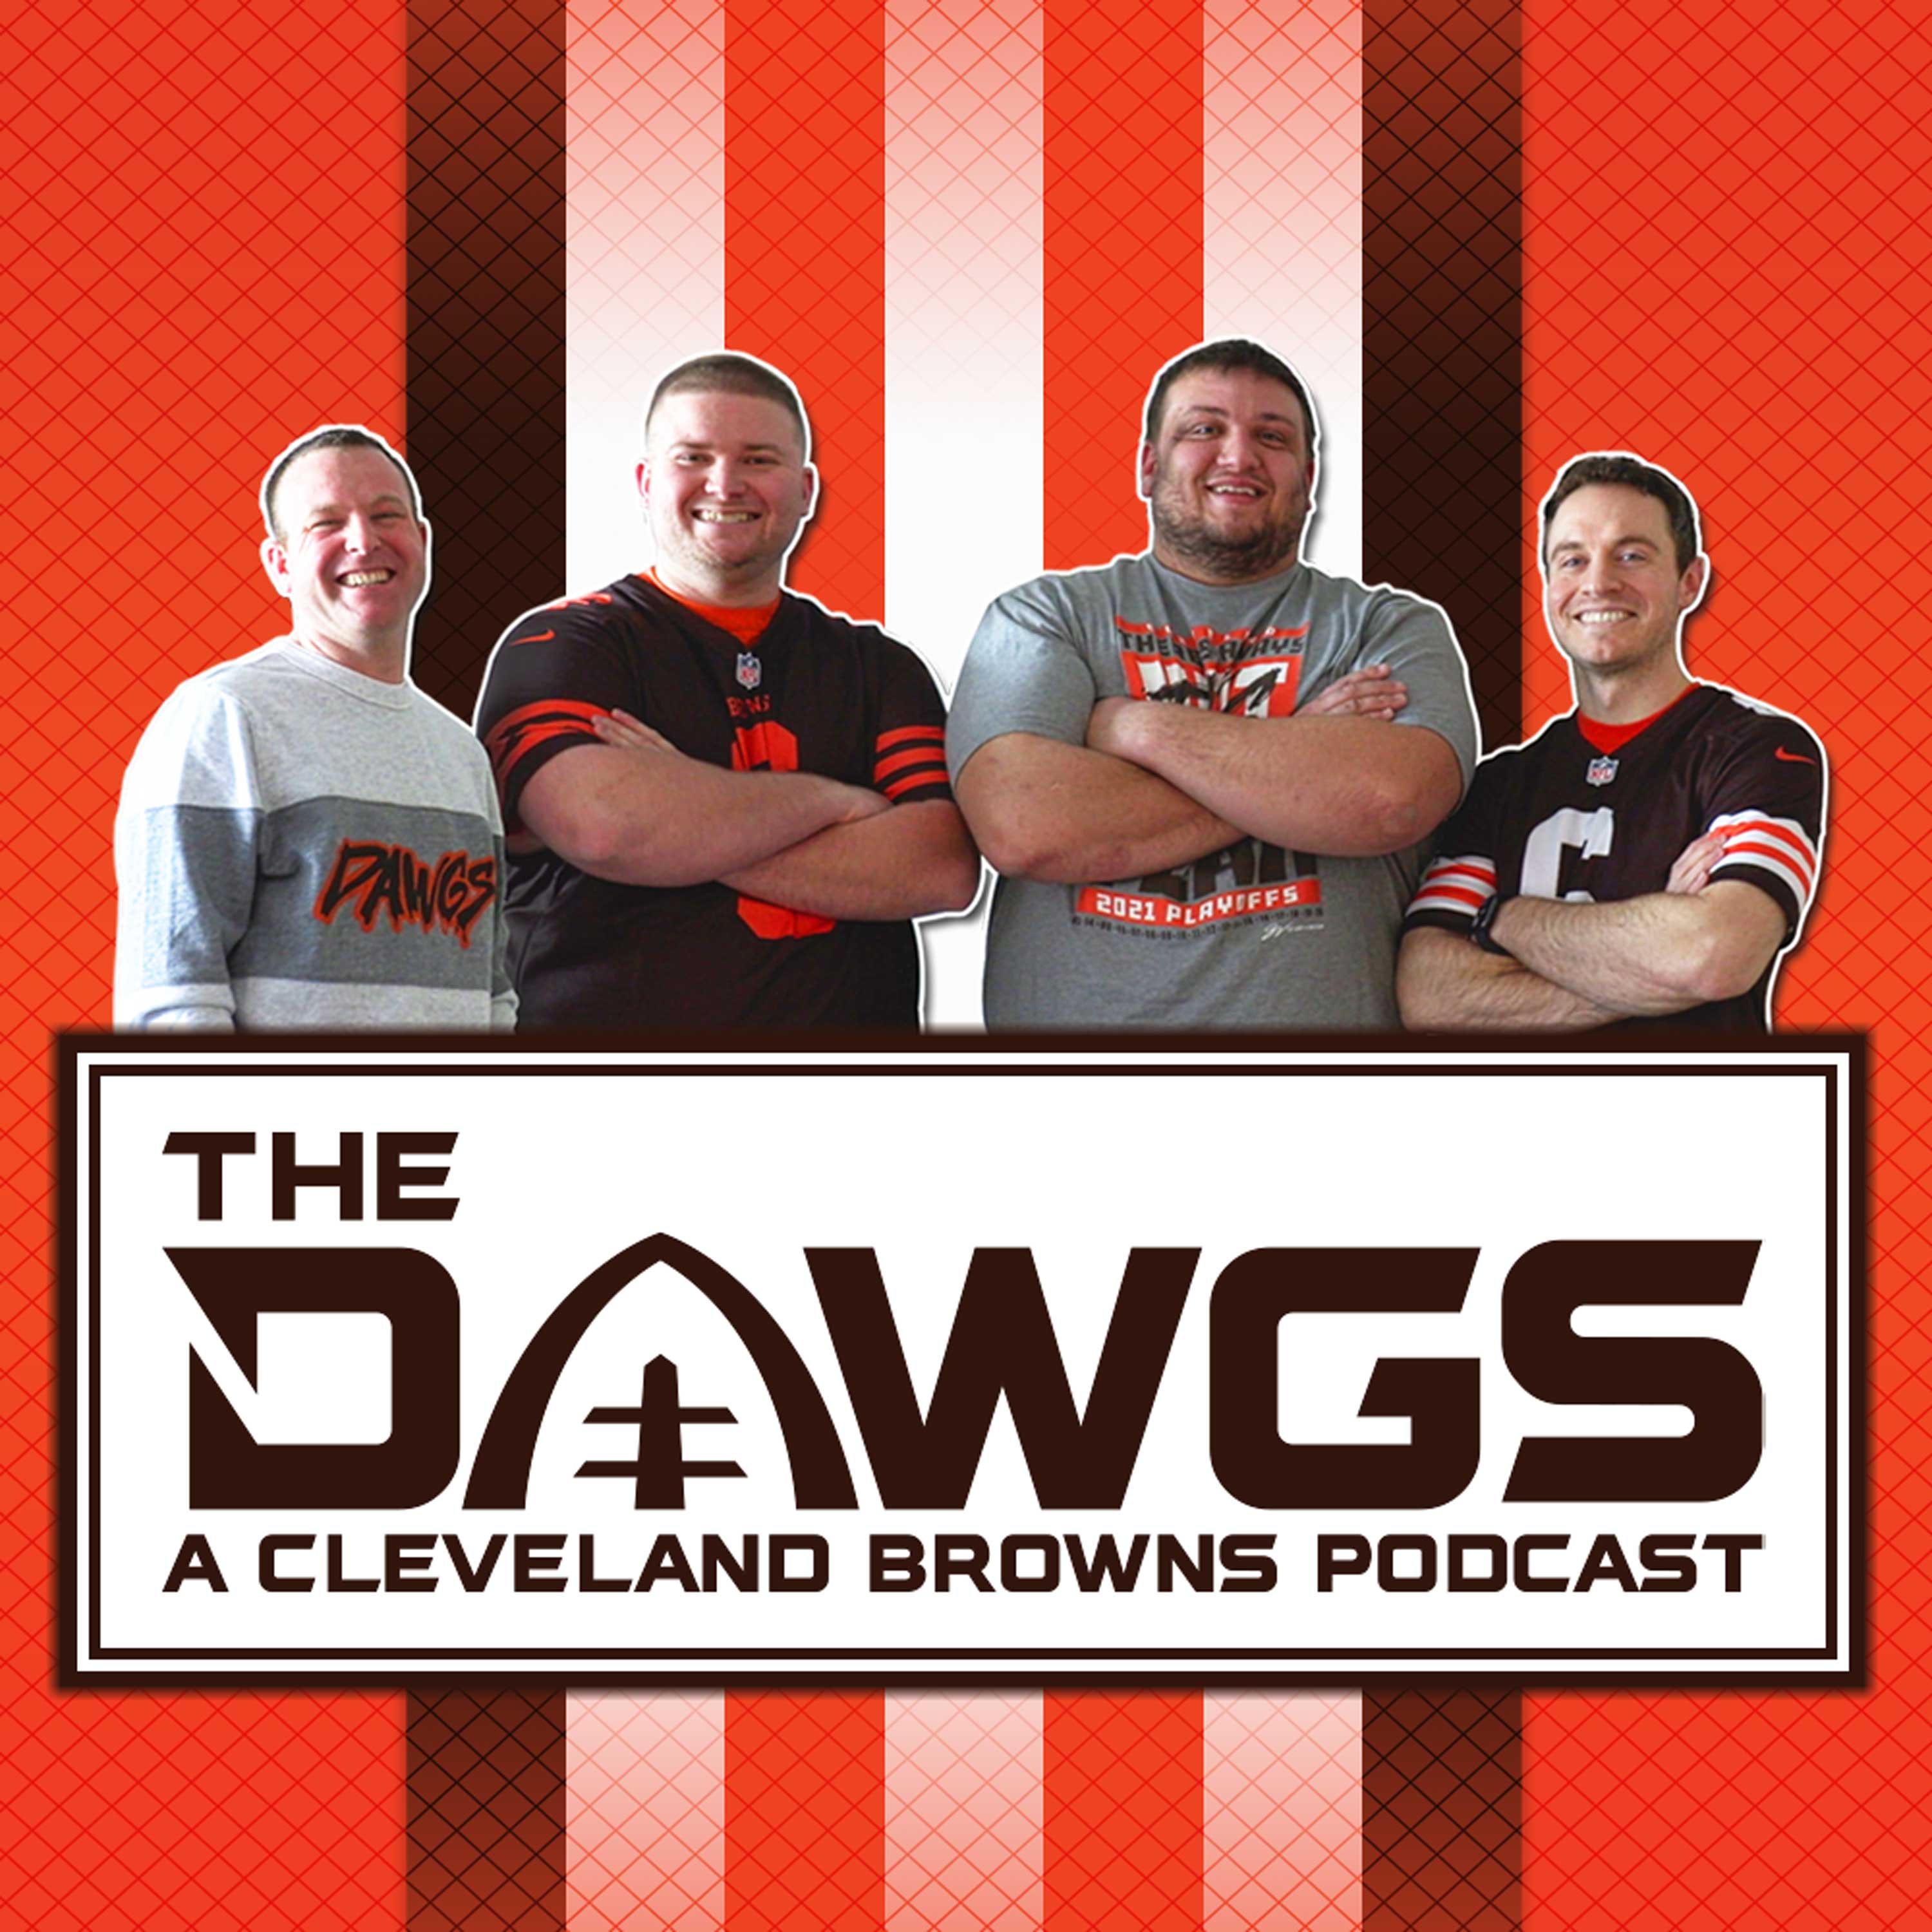 The Browns Late-Round Draft Steal + Rodgers vs Baker | The Dawgs - A Cleveland Browns Podcast - May 9, 2021